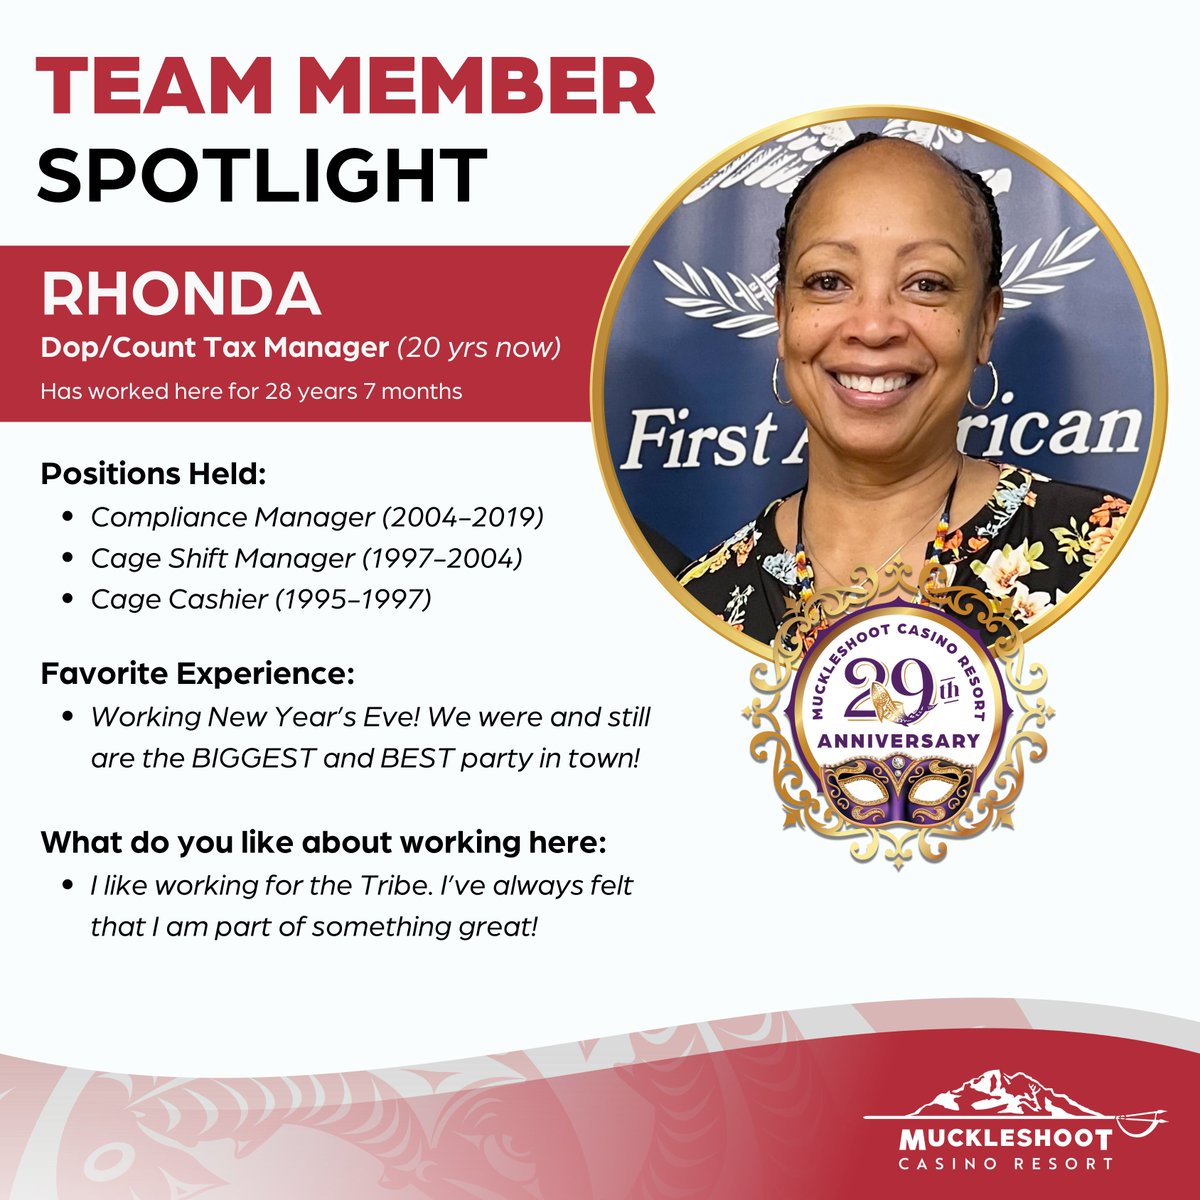 🍾Happy 29th Anniversary Month! Get to know our Team Members that have been here 20+ years! 

✨Rhonda, our Drop/Count Tax Manager has been here 28 years, 7 months! You definitely are part of something great and we love having you with us! Thank you for all you do!